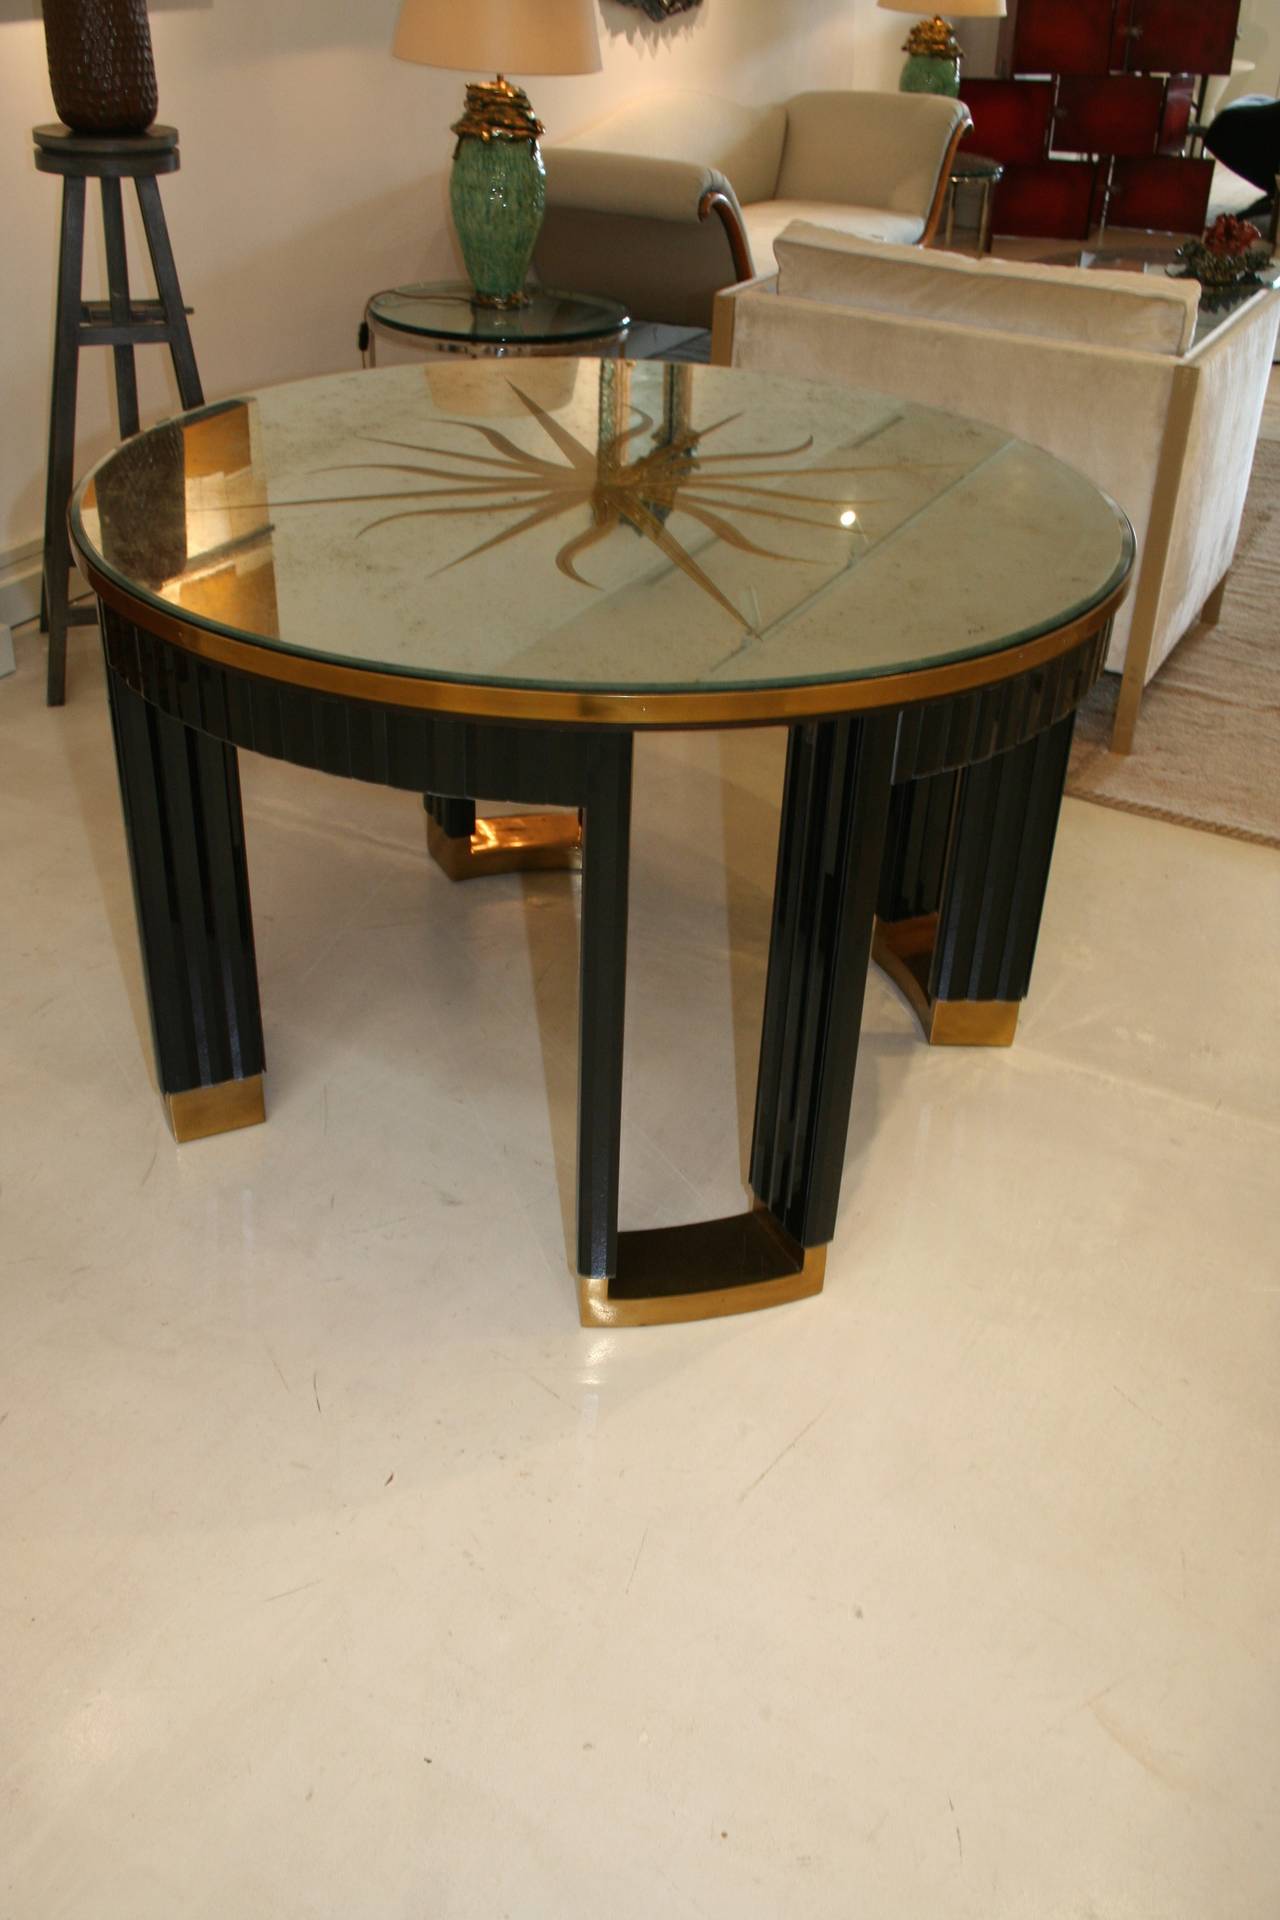 20th Century Brass-Mounted, Mirrored Glass Center Table